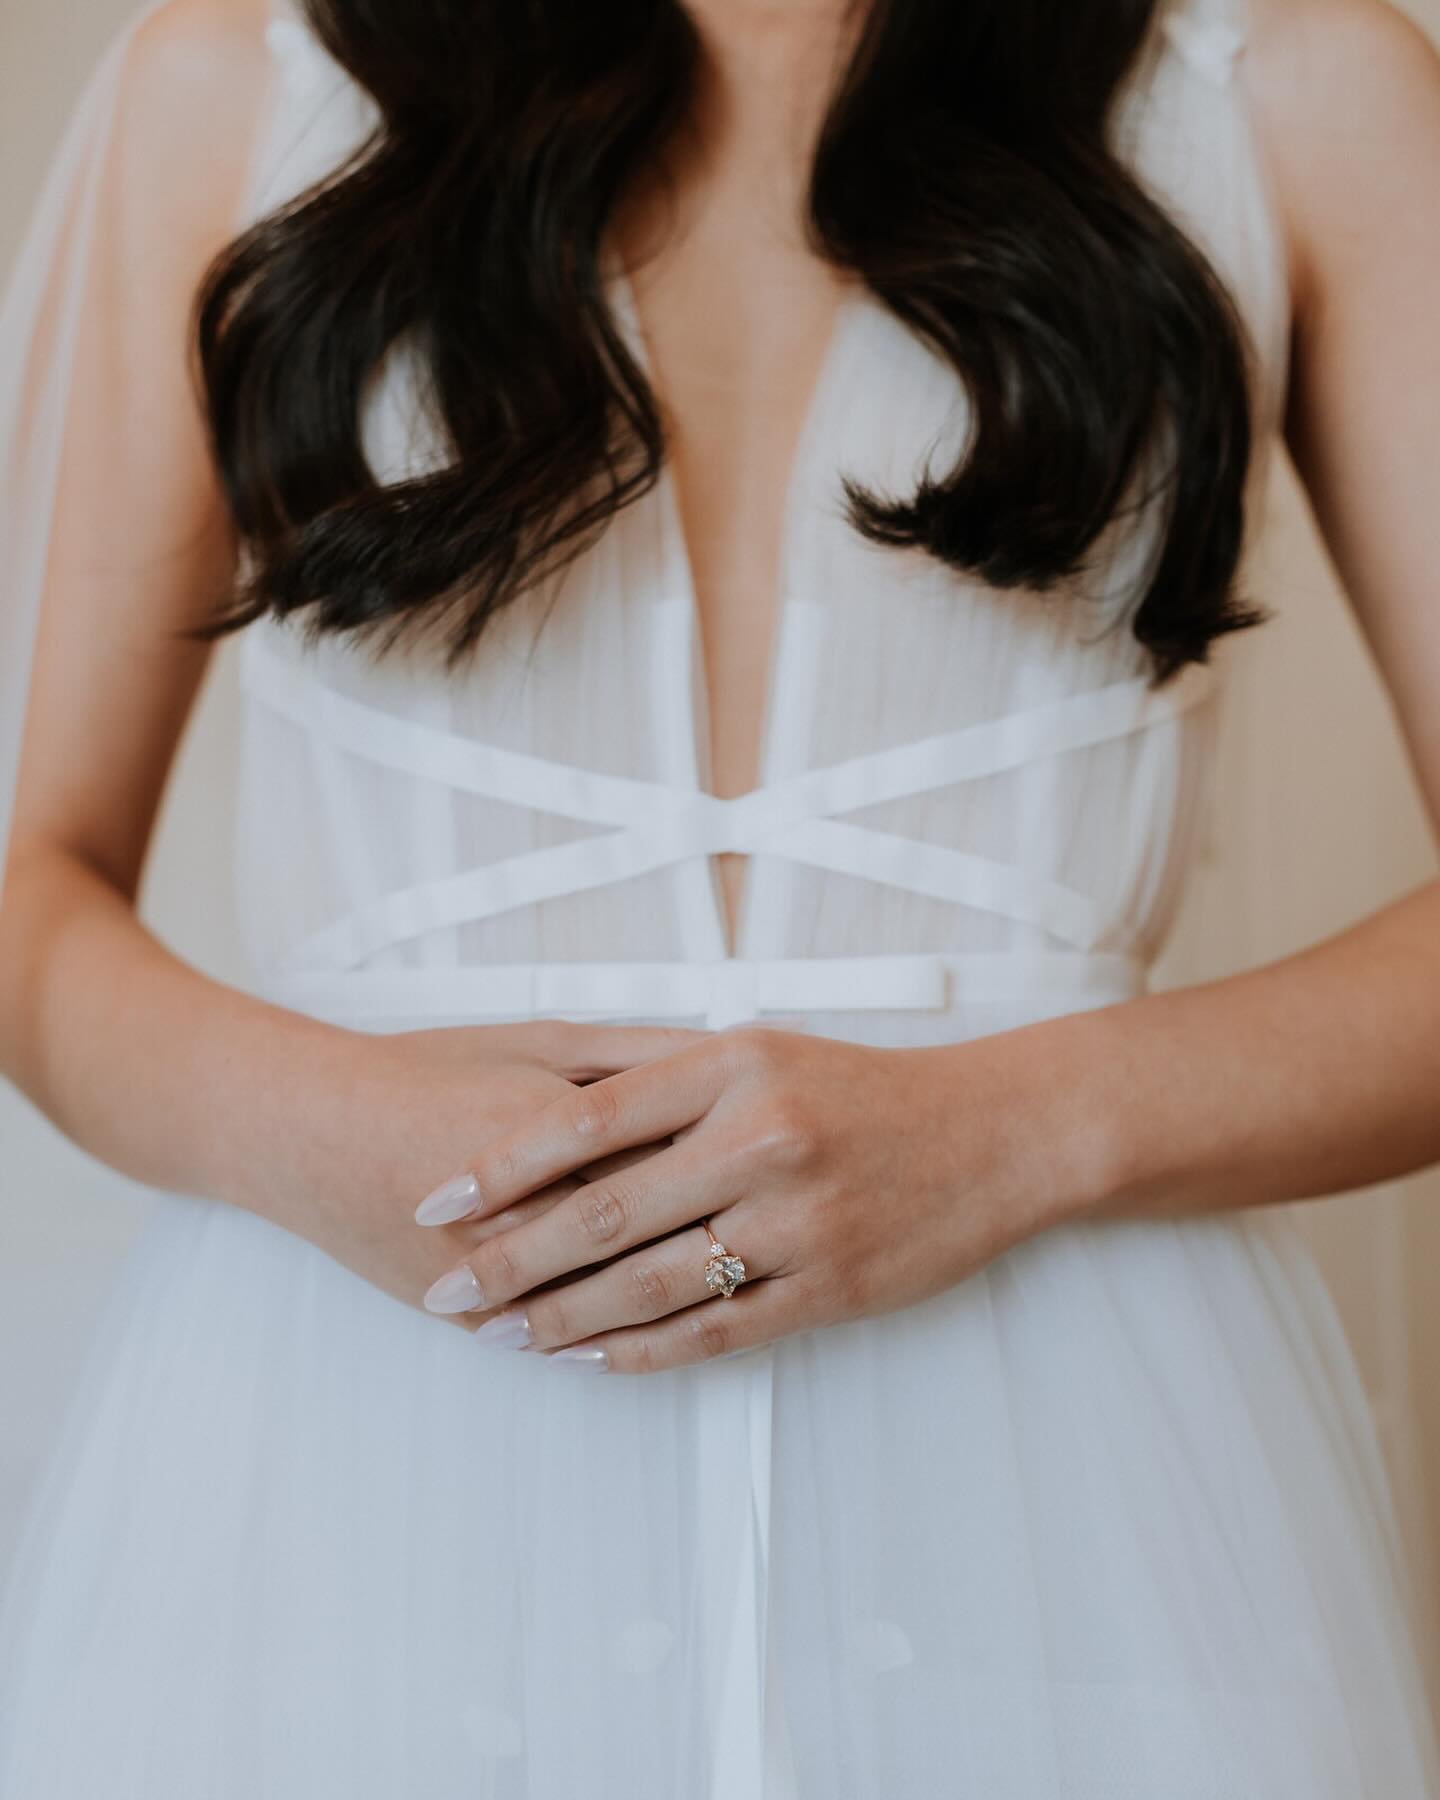 Have you thought about wedding day accessories? All of the little details make all the difference &ndash; below are some to consider:

✨Veil
✨Headpiece
✨Hairpiece
✨Cape
✨Necklace
✨Earrings
✨Bracelet
✨Cufflinks
✨Necktie/bow tie
✨Tie clip
✨Lapel pin
✨W